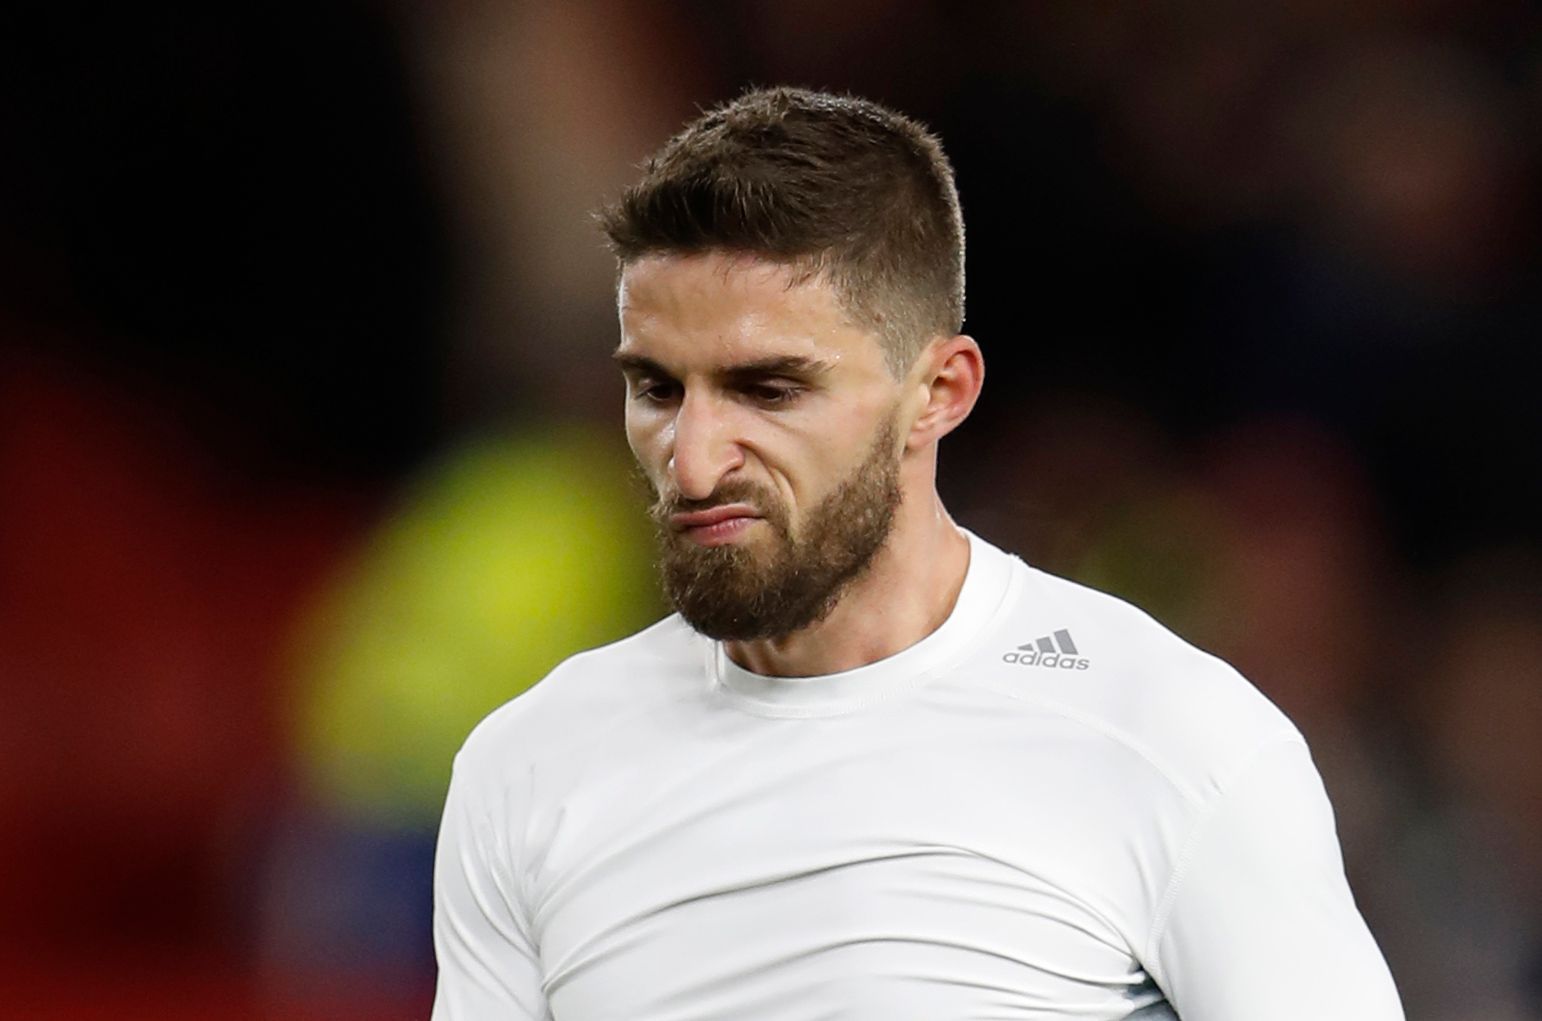 Britain Soccer Football - Middlesbrough v Sunderland - Premier League - The Riverside Stadium - 26/4/17 Sunderland's Fabio Borini looks dejected at the end of the match Action Images via Reuters / Lee Smith Livepic EDITORIAL USE ONLY. No use with unauthorized audio, video, data, fixture lists, club/league logos or 